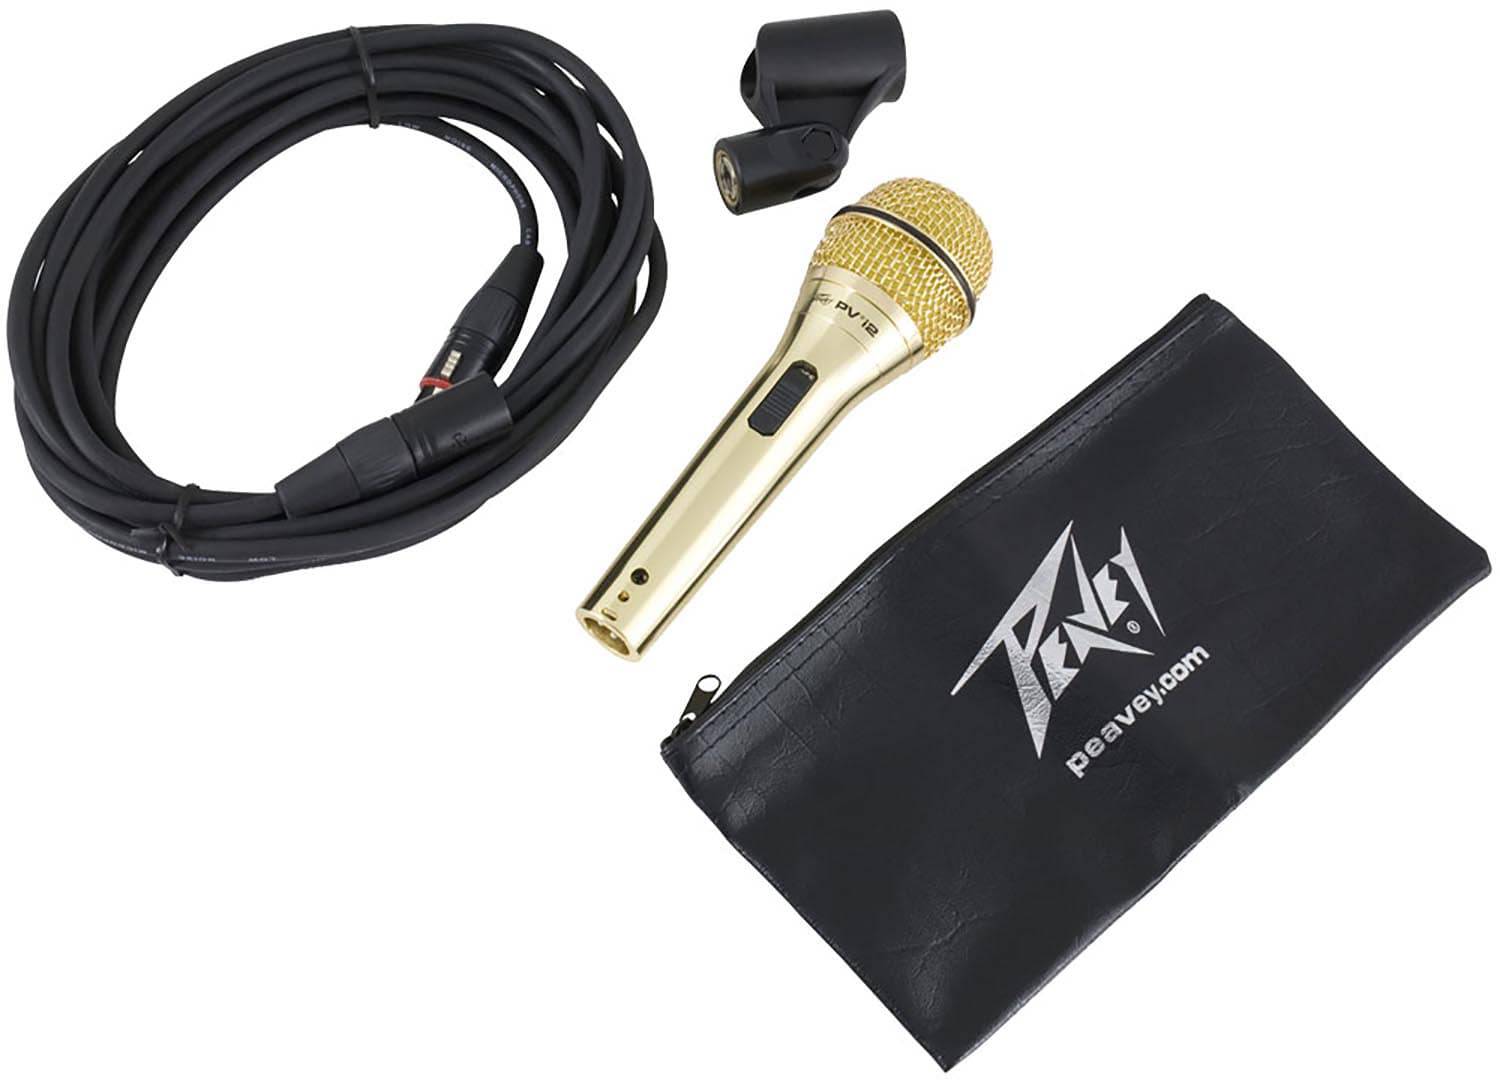 Peavey PVI 2G Cardioid Unidirectional Dynamic Vocal Microphone with XLR Cable - Gold - Hollywood DJ